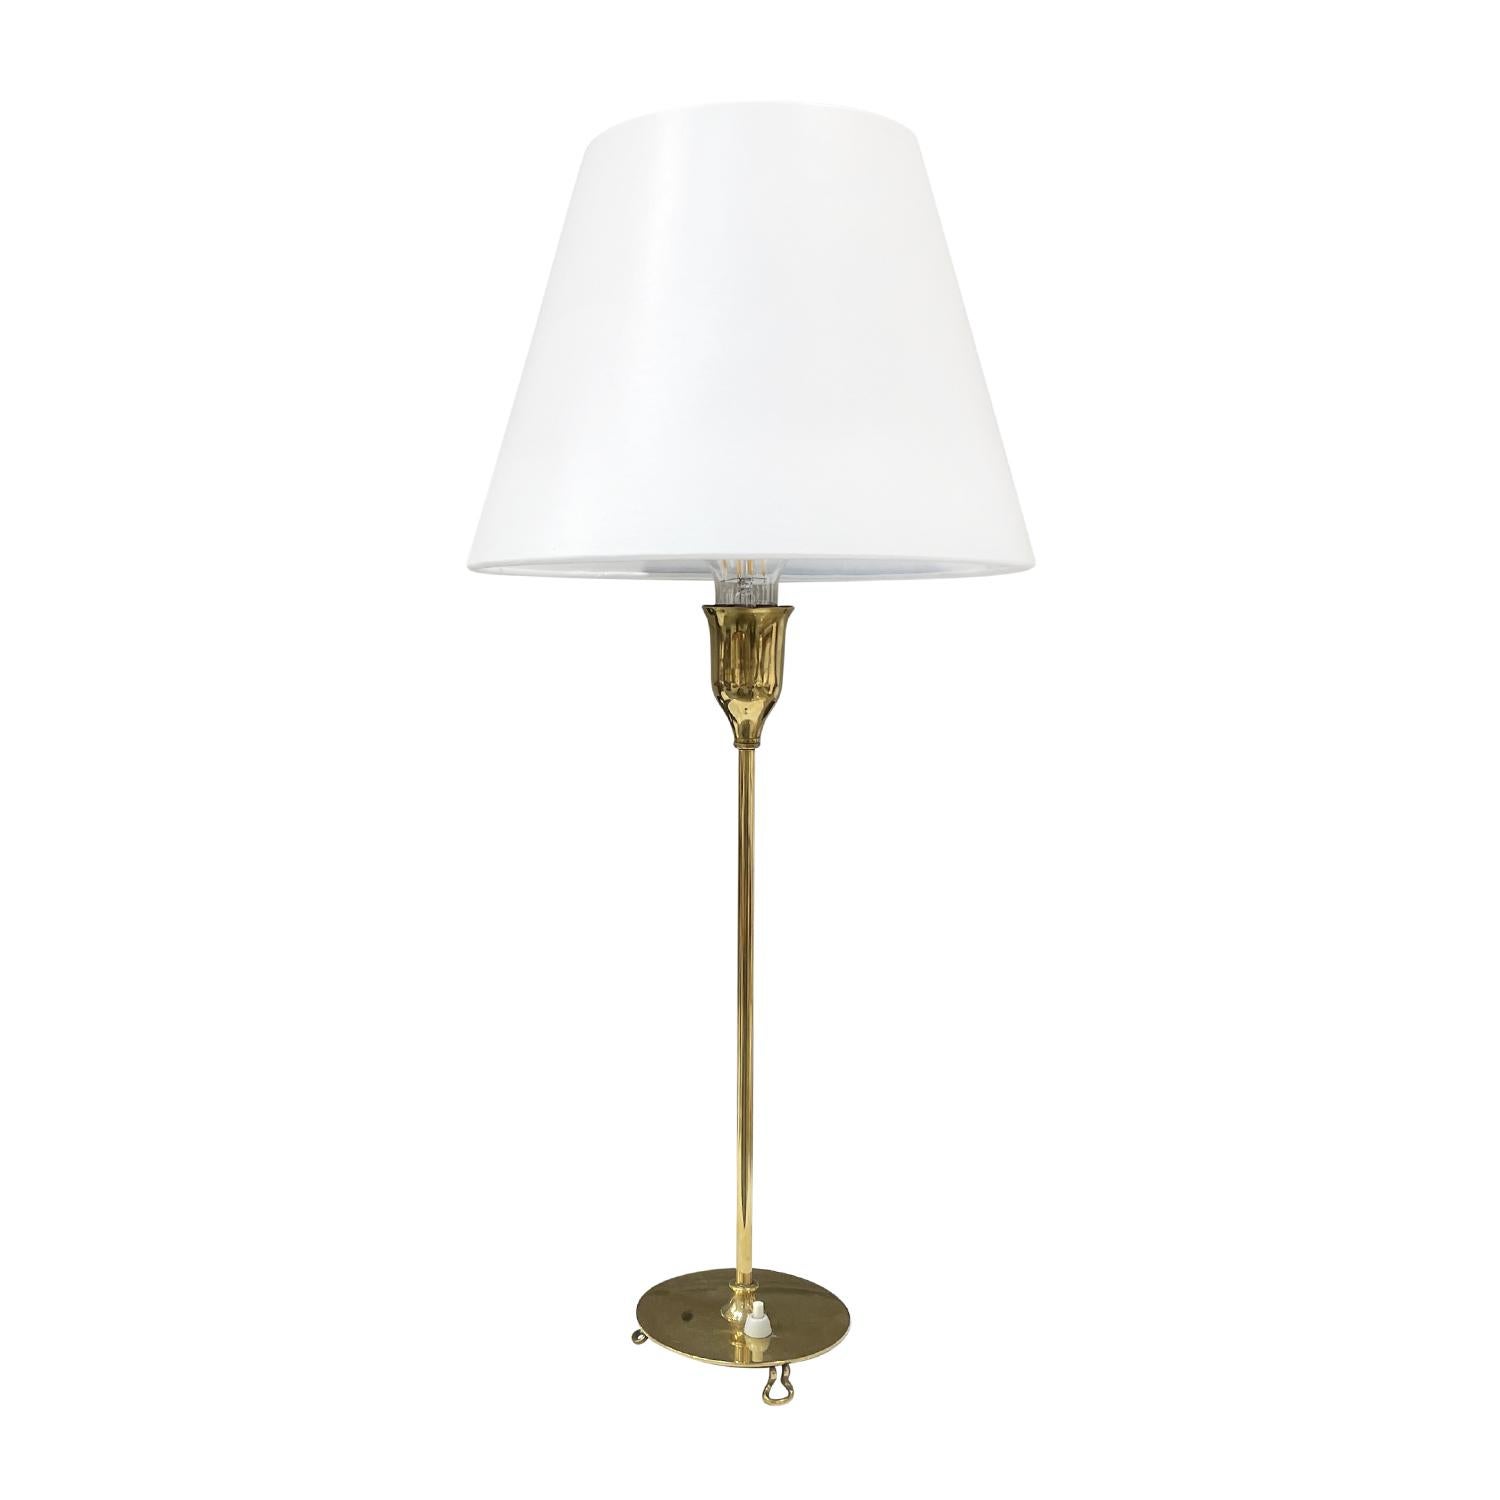 A gold, vintage Mid-Century Modern Swedish dressing table lamp with a new white round shade made of hand crafted polished brass, designed by Josef Frank and produced by Svenskt Tenn in good condition. The stem of the small Scandinavian desk light is